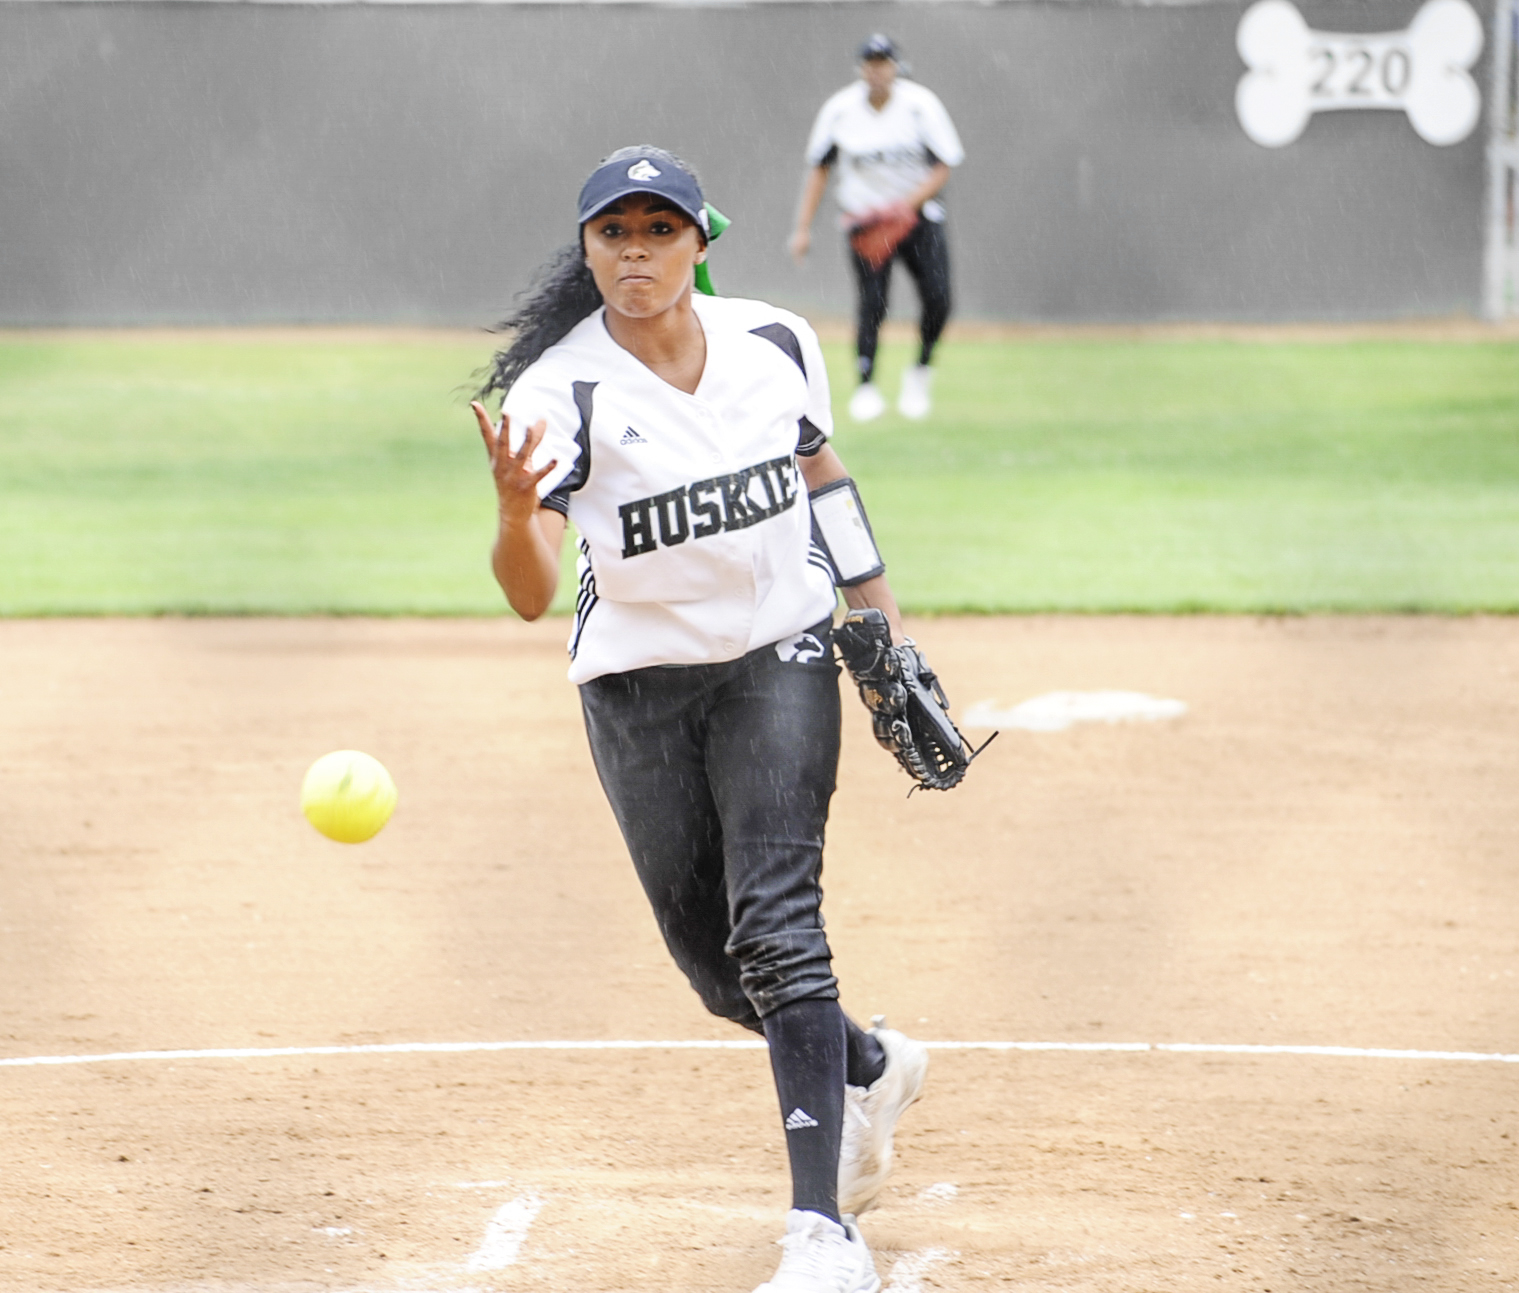 East Los Angeles College freshman Majisty Shomo pitched the distance in a Huskies 2-0 upset win over Mt. San Antonio College. (Photo by Tadzio Garcia)